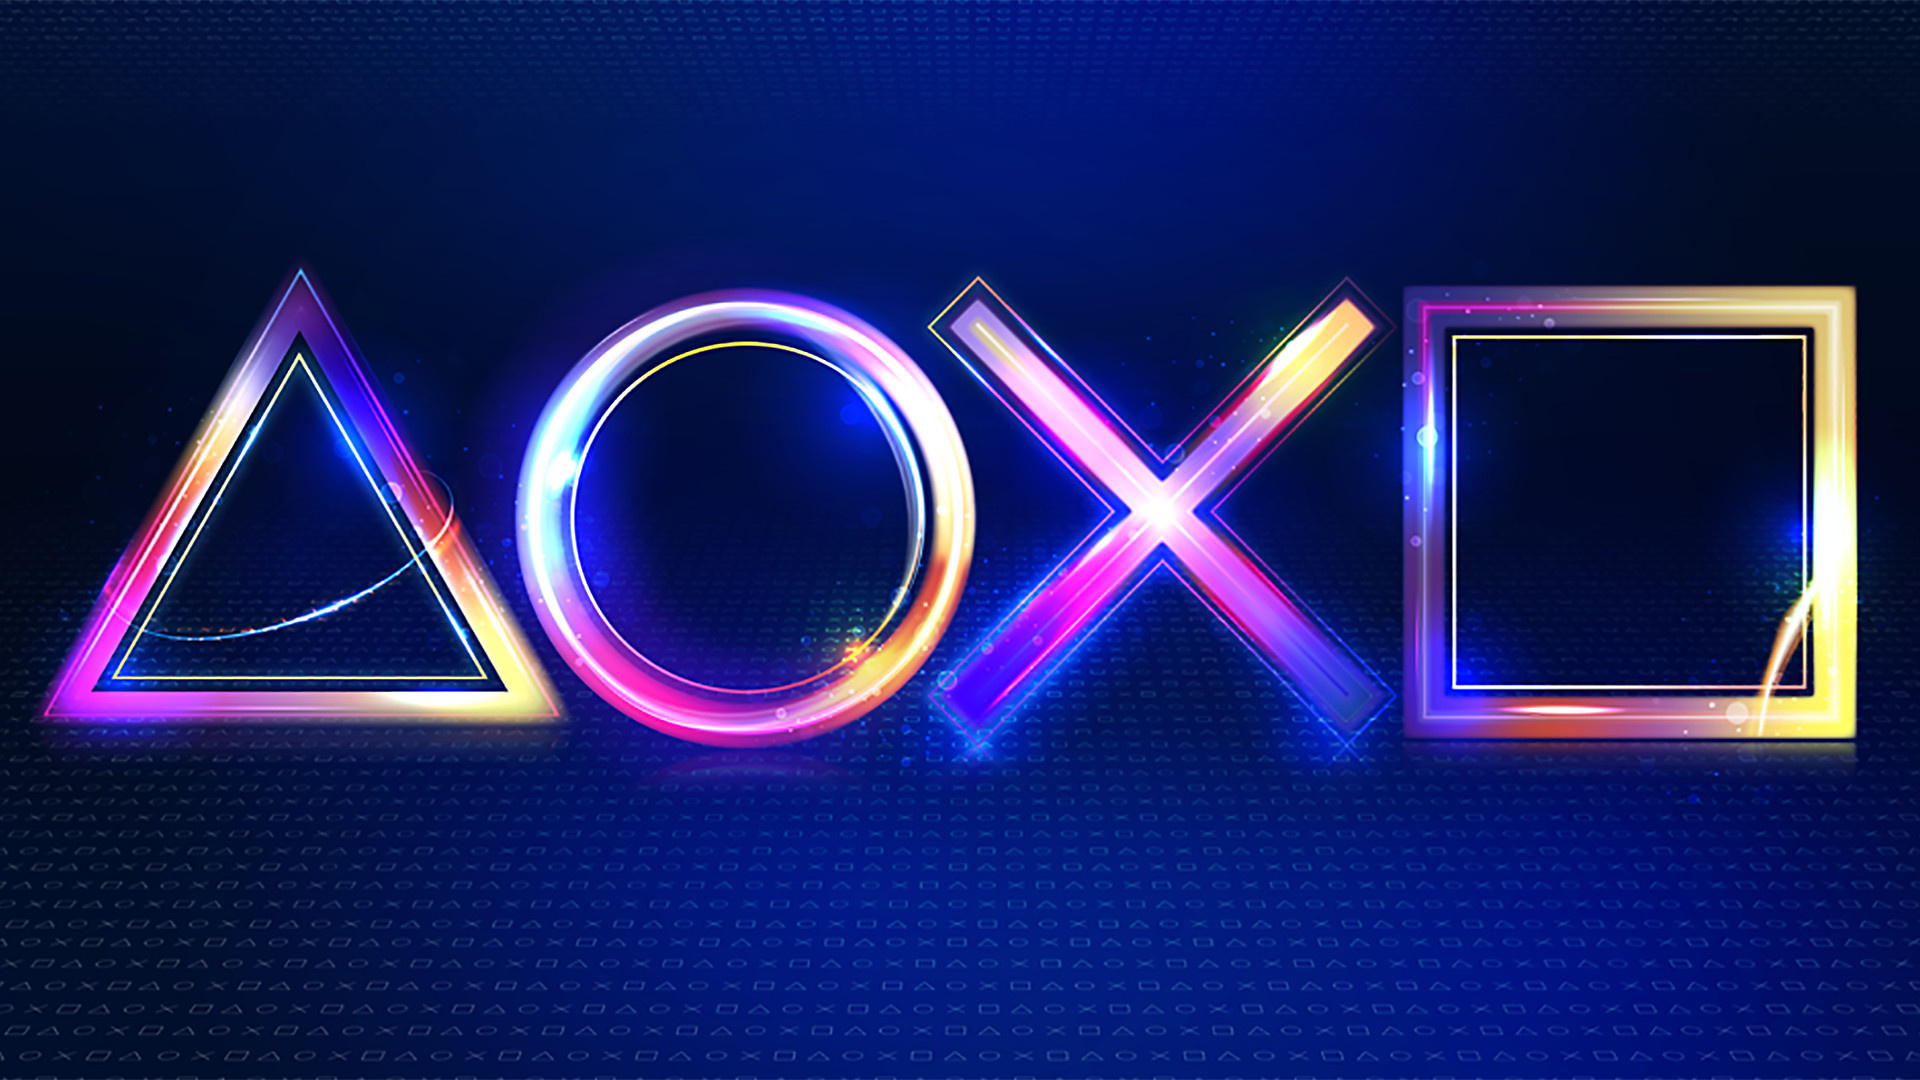 The PlayStation: PS4, The best-selling home console, Released in 2013. 1920x1080 Full HD Wallpaper.